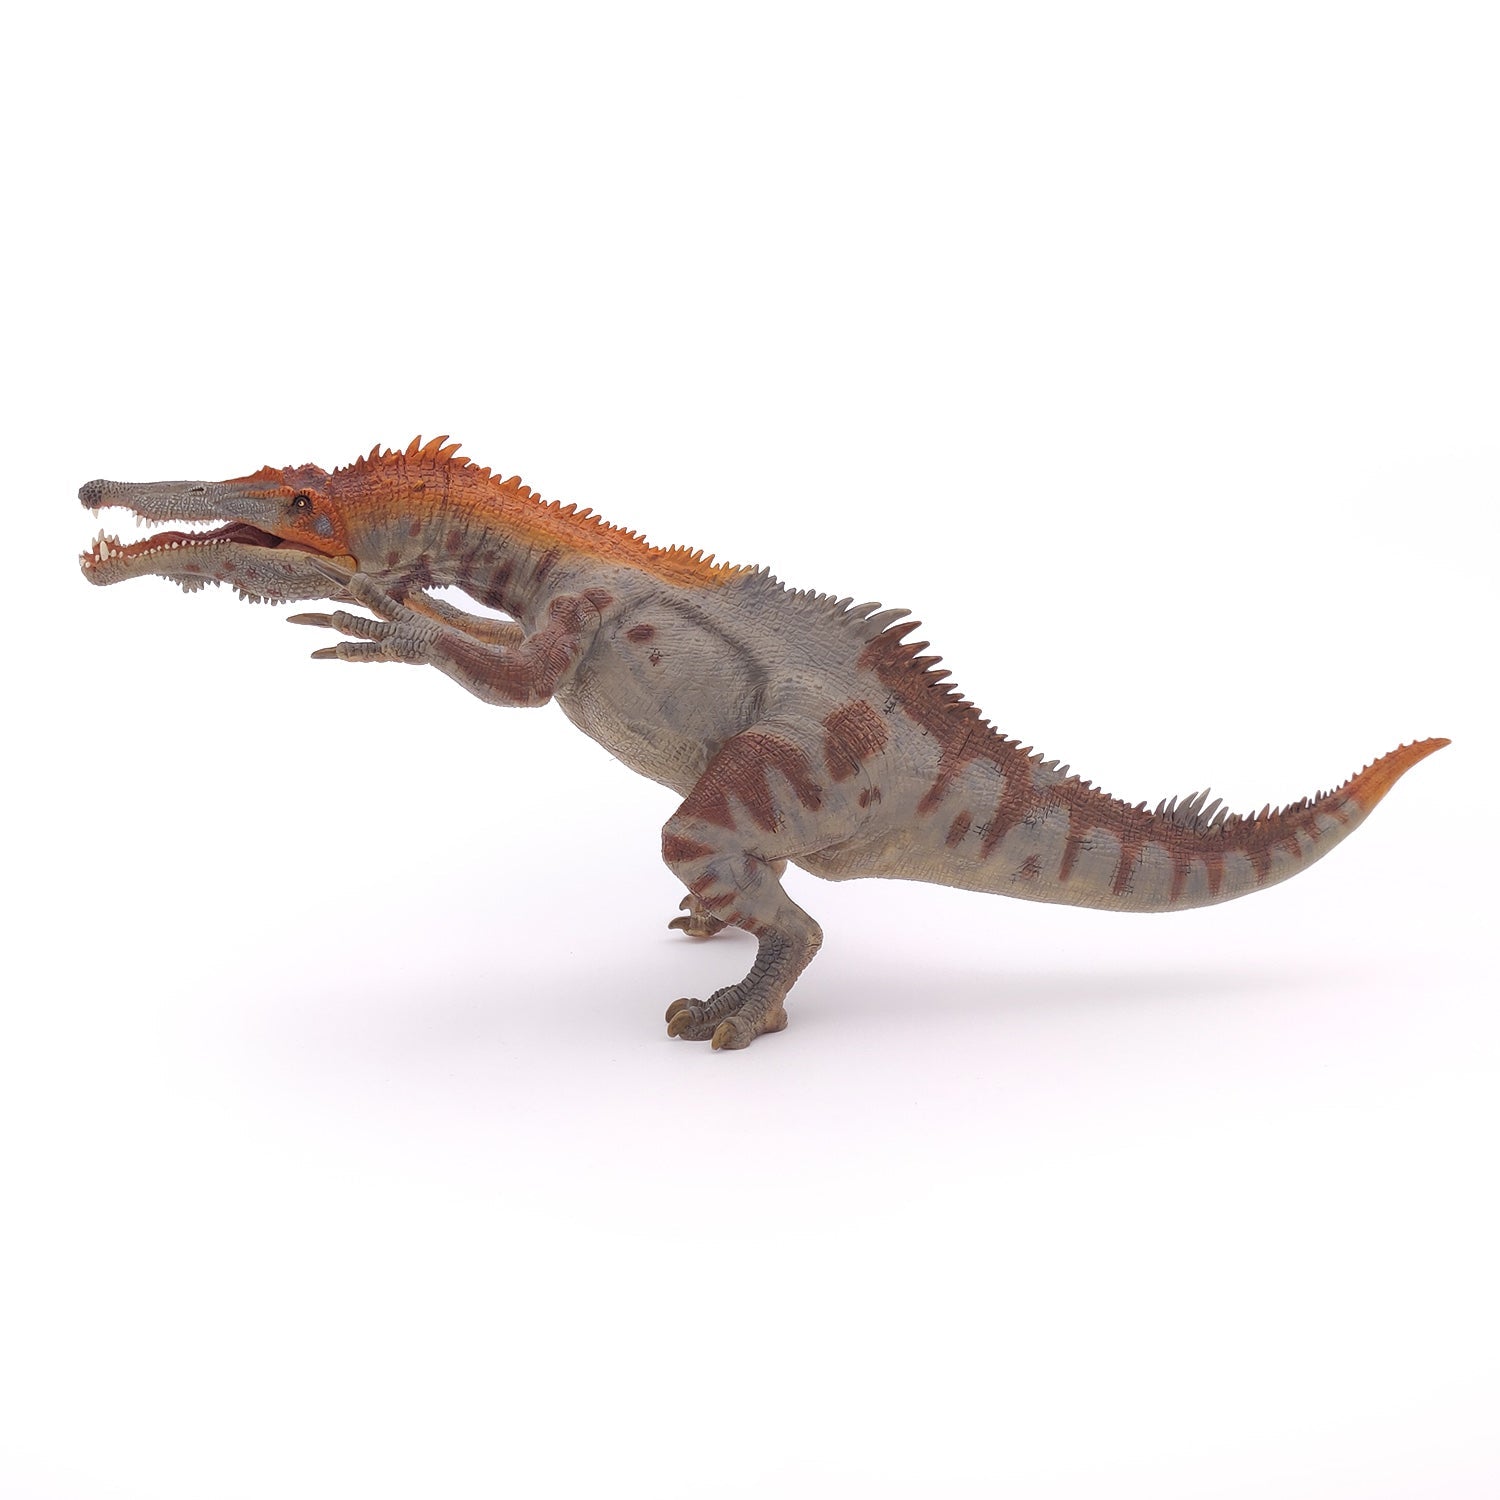 Baryonyx Dinosaur Replica Toy with jaw open